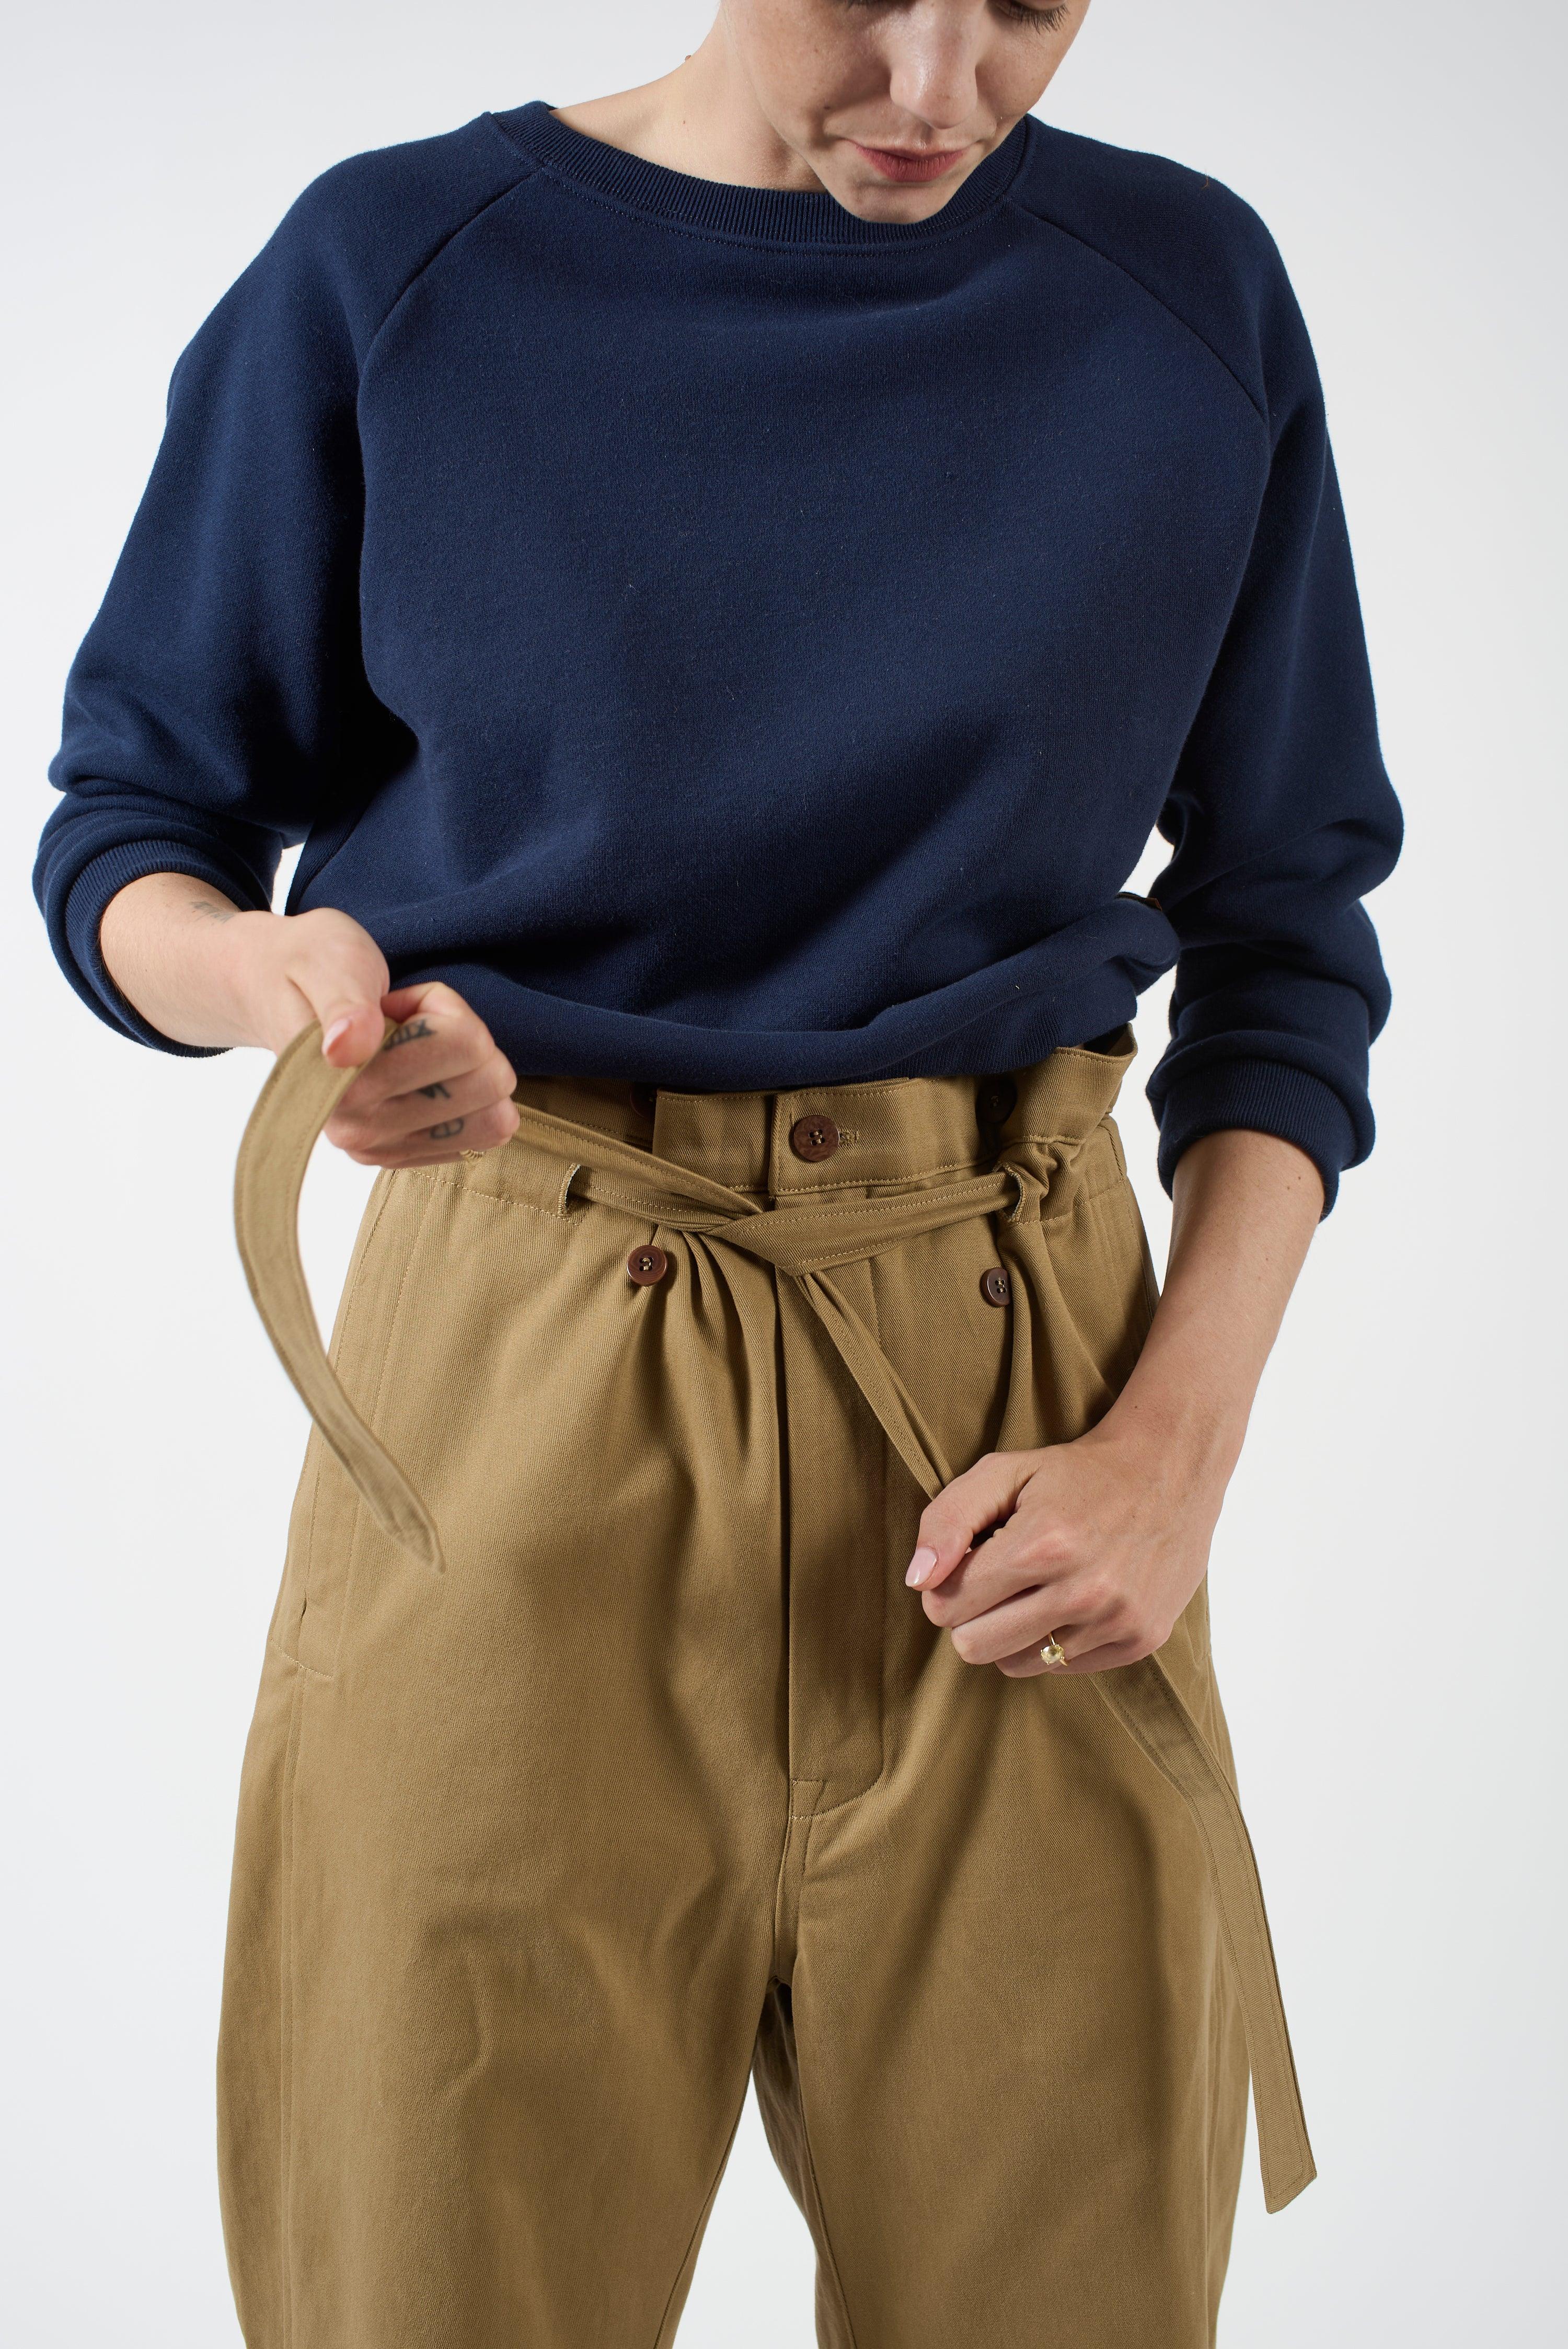 The Everything Pant in Chestnut Detail of Waist 3